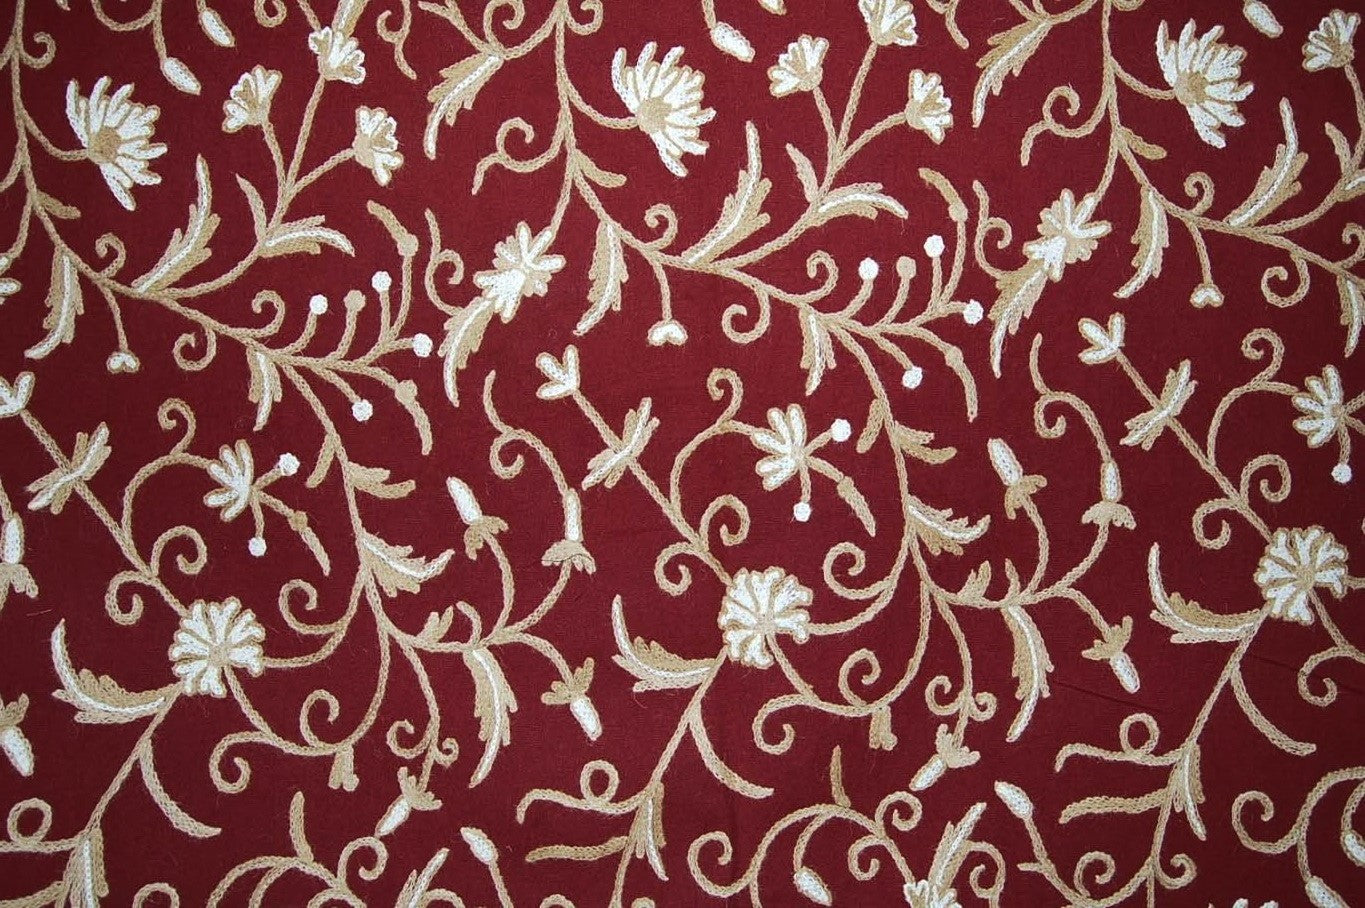 Beige and White on Maroon, "Jacobean" Cotton Crewel Fabric #TML202